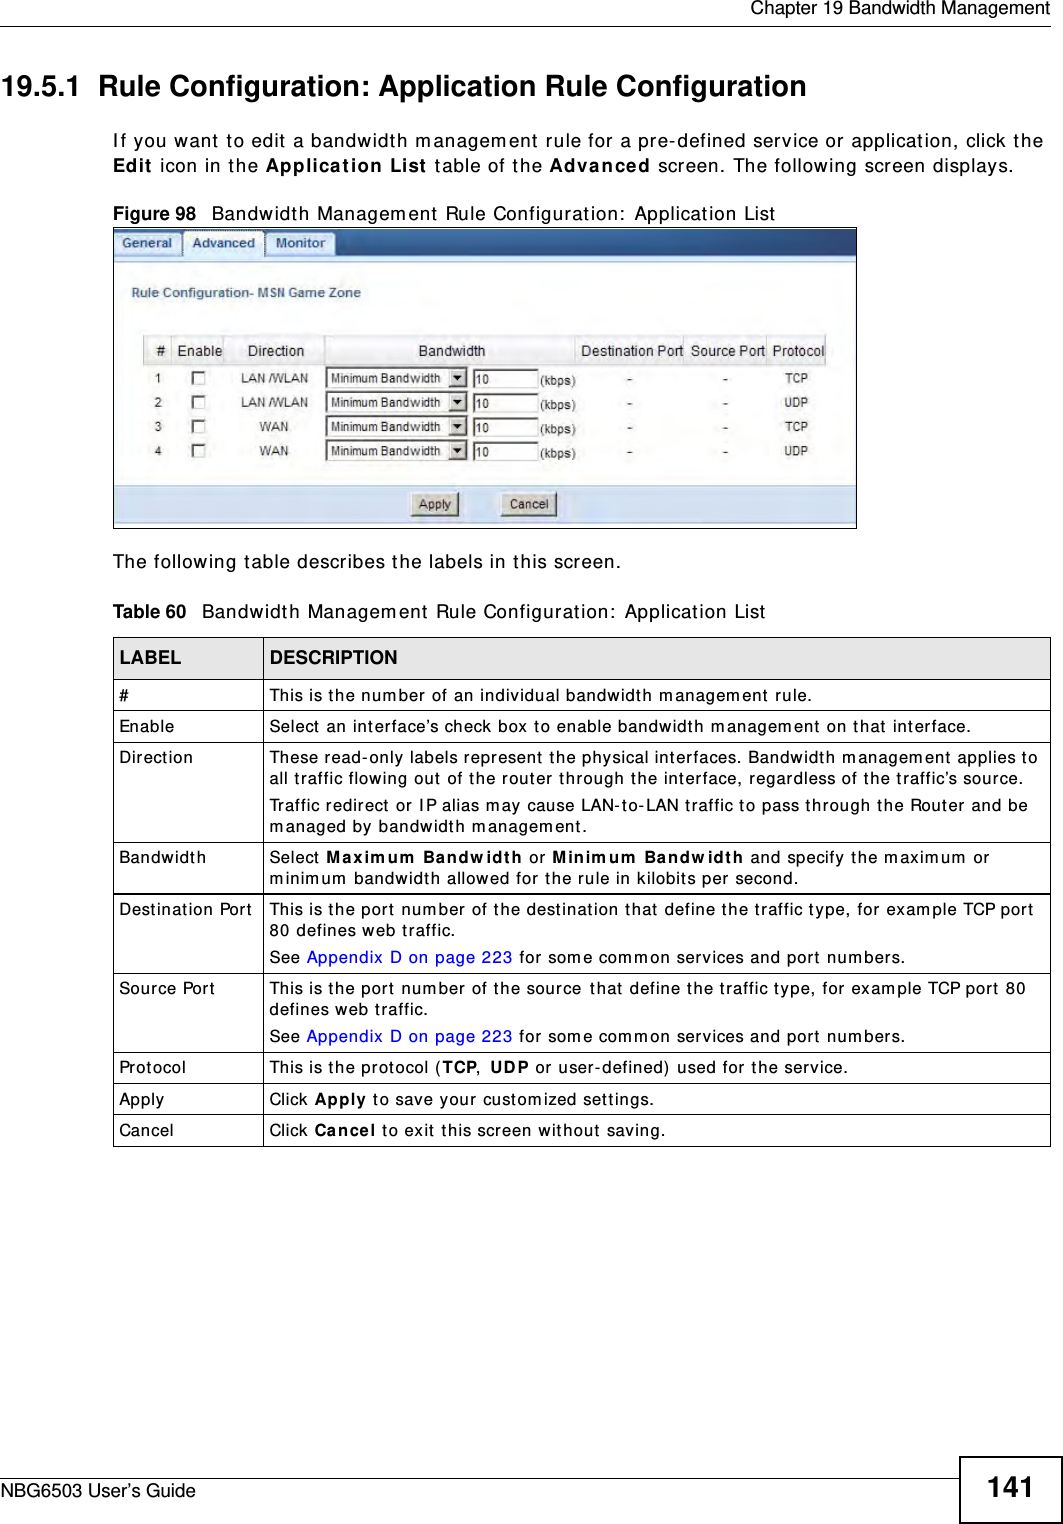  Chapter 19 Bandwidth ManagementNBG6503 User’s Guide 14119.5.1  Rule Configuration: Application Rule Configuration    If you want to edit a bandwidth management rule for a pre-defined service or application, click the Edit icon in the Application List table of the Advanced screen. The following screen displays.Figure 98   Bandwidth Management Rule Configuration: Application ListThe following table describes the labels in this screen.Table 60   Bandwidth Management Rule Configuration: Application ListLABEL DESCRIPTION#This is the number of an individual bandwidth management rule.Enable Select an interface’s check box to enable bandwidth management on that interface. Direction  These read-only labels represent the physical interfaces. Bandwidth management applies to all traffic flowing out of the router through the interface, regardless of the traffic’s source.Traffic redirect or IP alias may cause LAN-to-LAN traffic to pass through the Router and be managed by bandwidth management.Bandwidth Select Maximum Bandwidth or Minimum Bandwidth and specify the maximum or minimum bandwidth allowed for the rule in kilobits per second. Destination Port This is the port number of the destination that define the traffic type, for example TCP port 80 defines web traffic.See Appendix D on page 223 for some common services and port numbers.Source Port This is the port number of the source that define the traffic type, for example TCP port 80 defines web traffic.See Appendix D on page 223 for some common services and port numbers.Protocol This is the protocol (TCP, UDP or user-defined) used for the service.Apply Click Apply to save your customized settings.Cancel Click Cancel to exit this screen without saving.